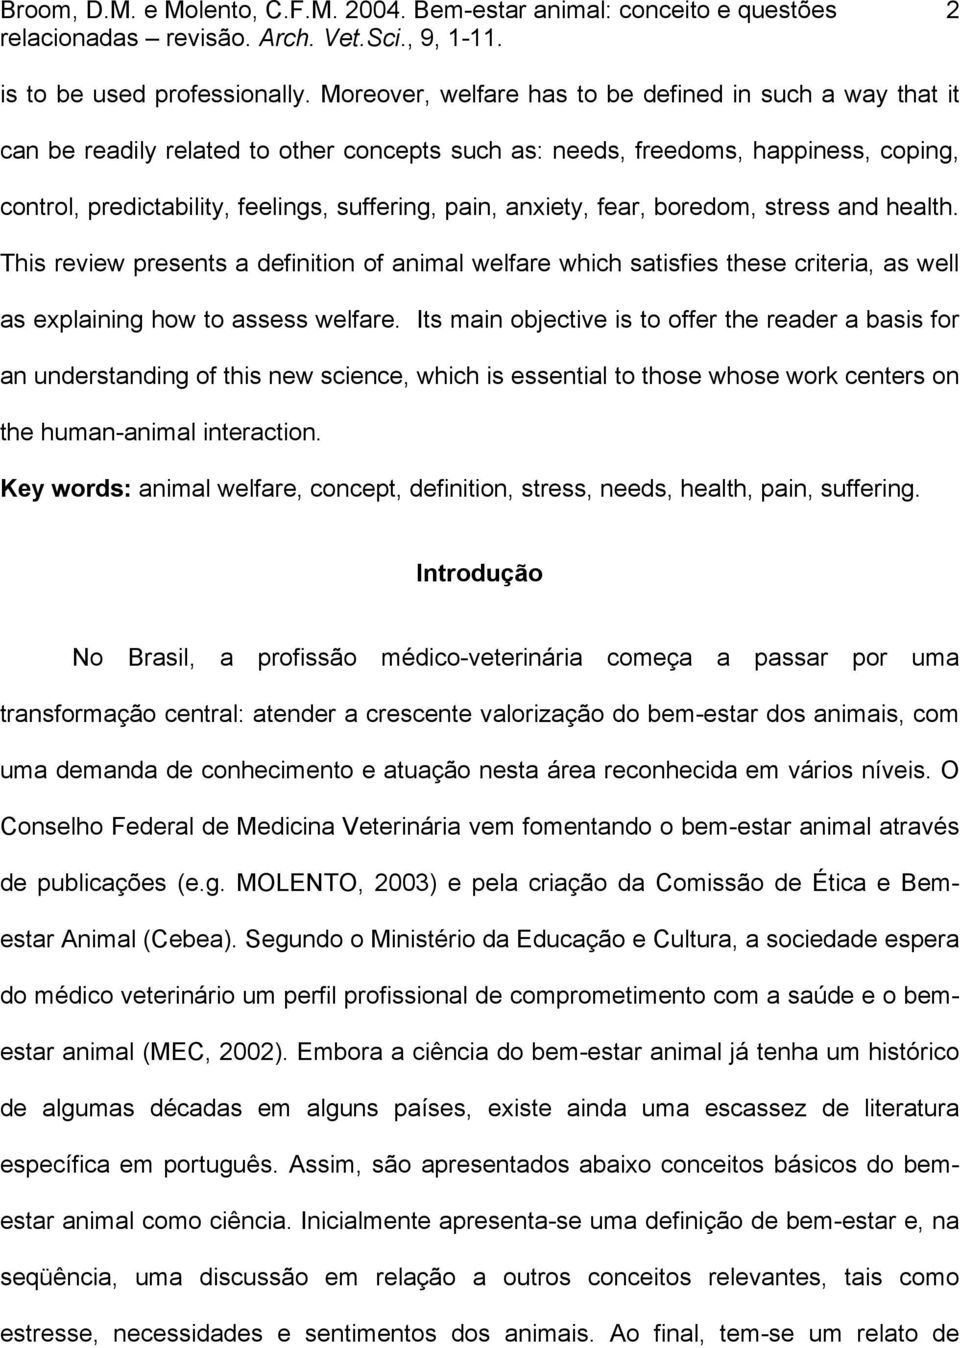 anxiety, fear, boredom, stress and health. This review presents a definition of animal welfare which satisfies these criteria, as well as explaining how to assess welfare.